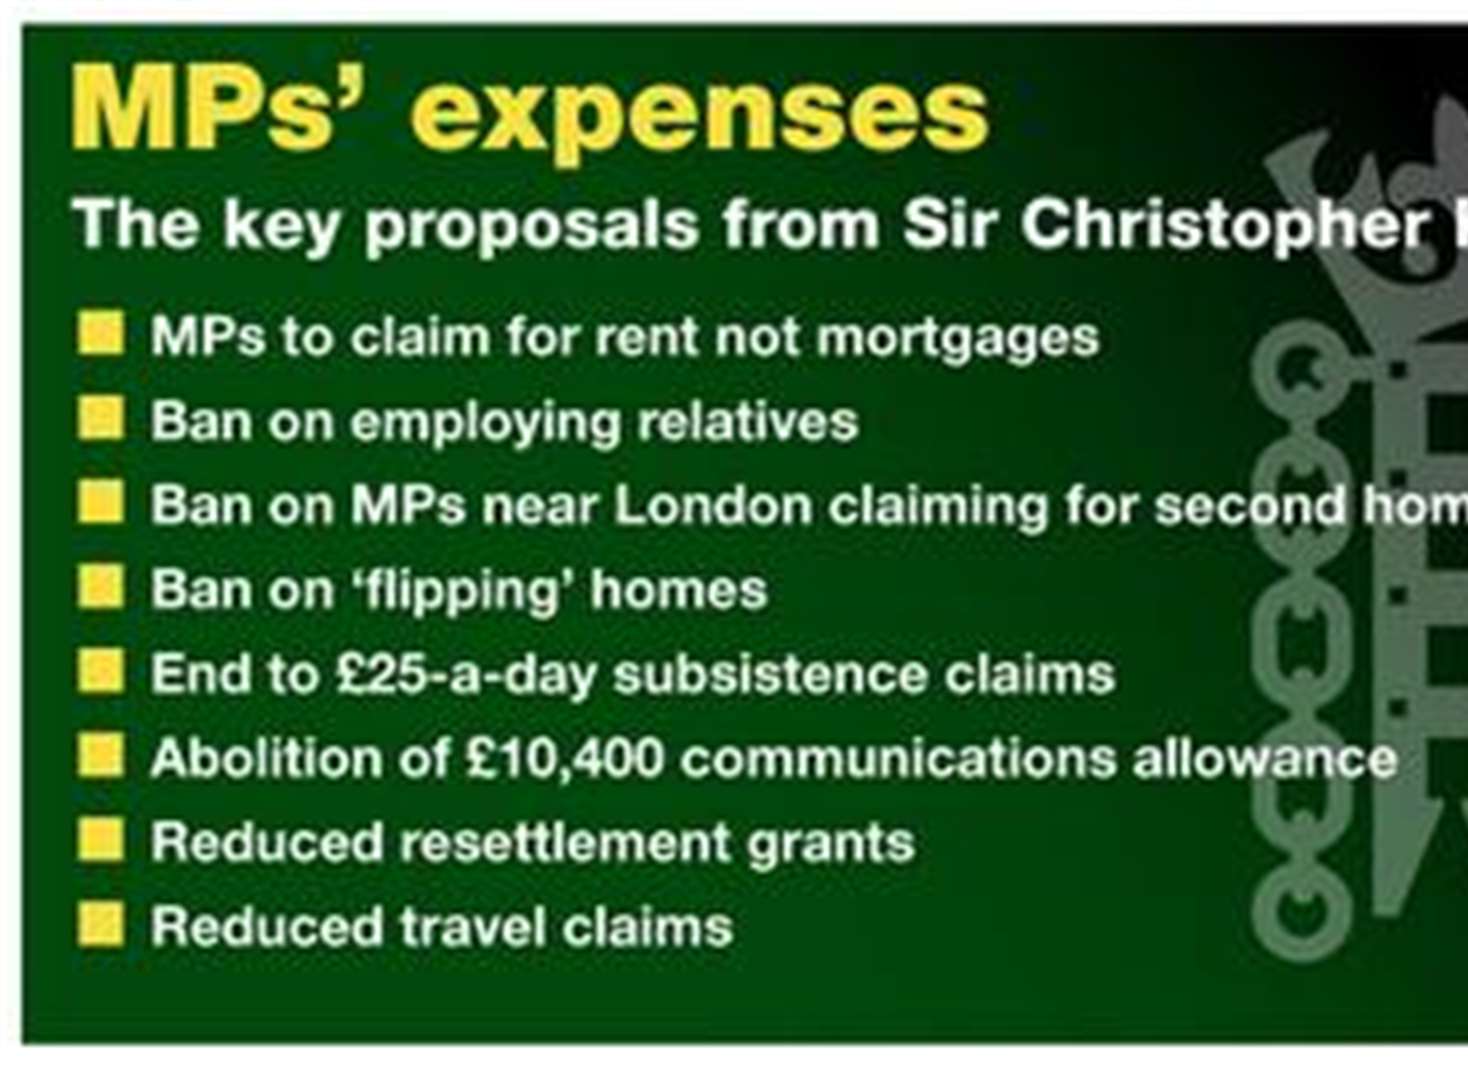 MPs learn savage expenses cuts